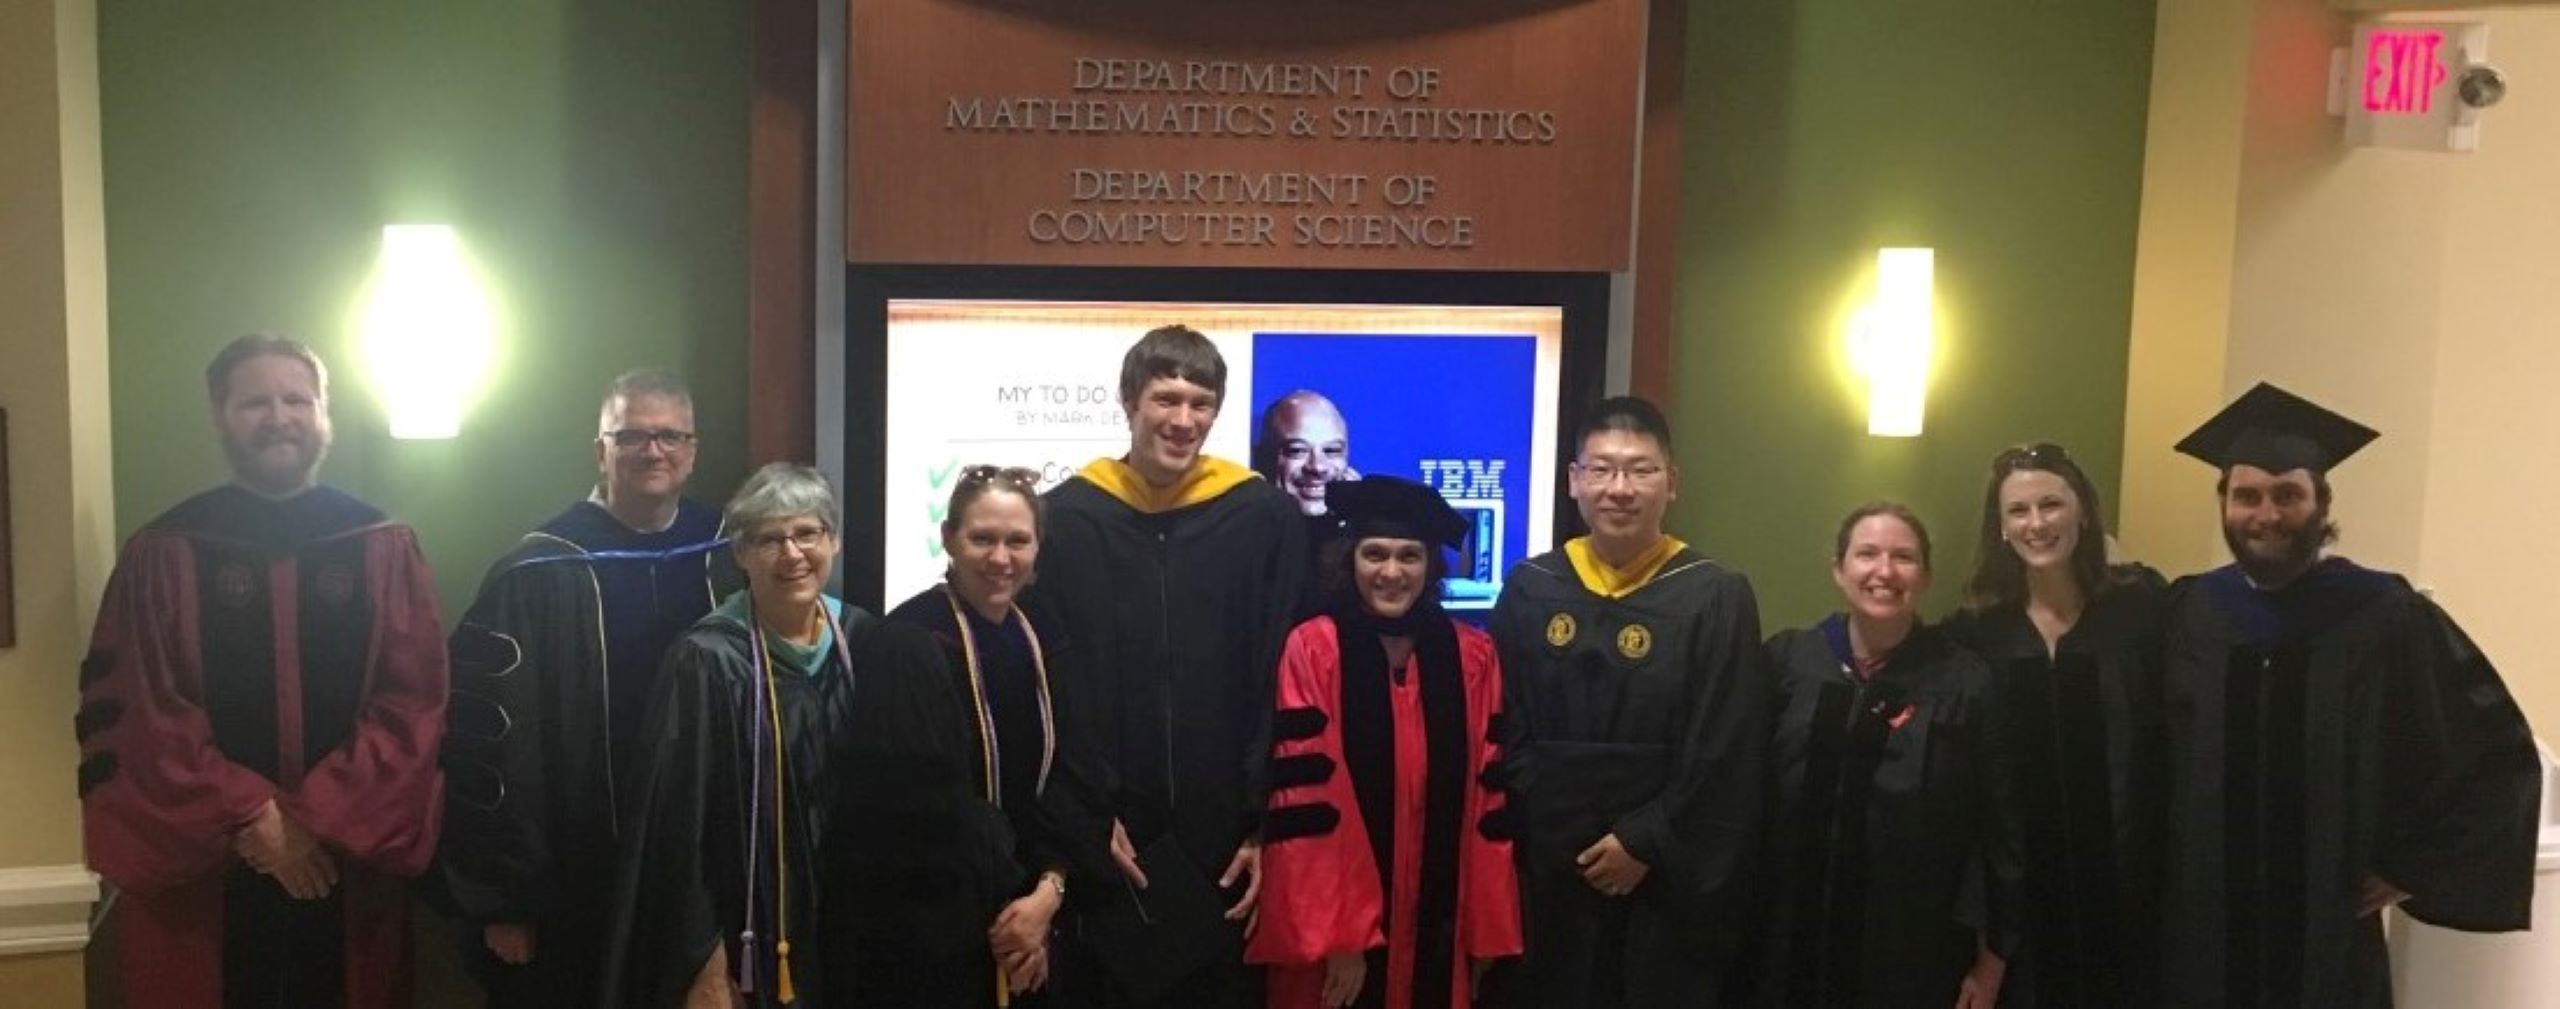 Math and statistics faculty wearing robes for graduation.